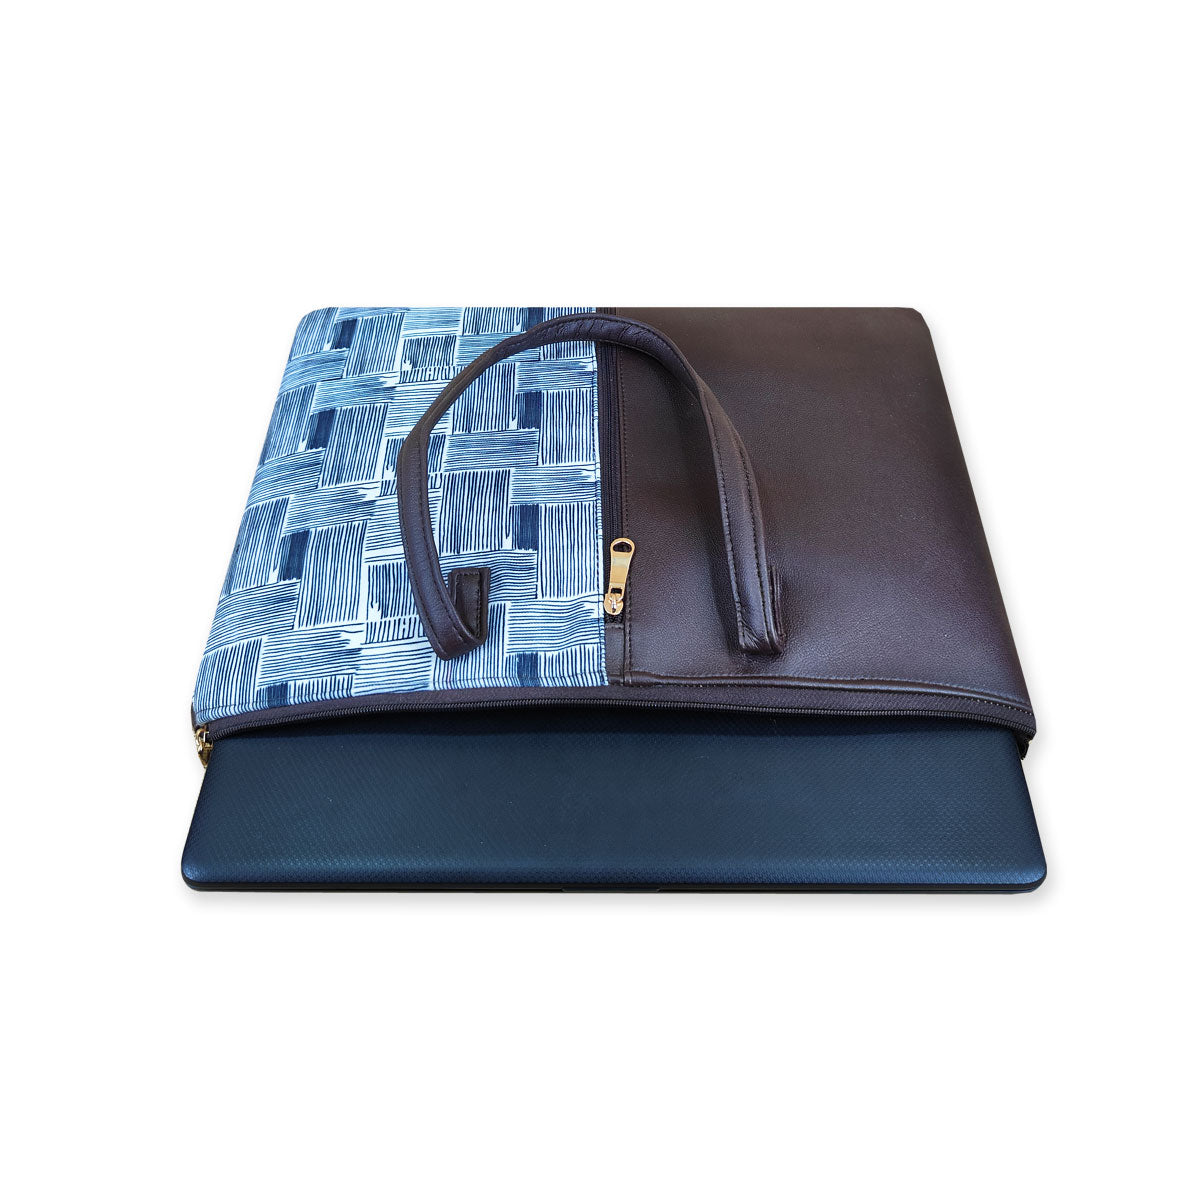 The Scribble Laptop Sleeve